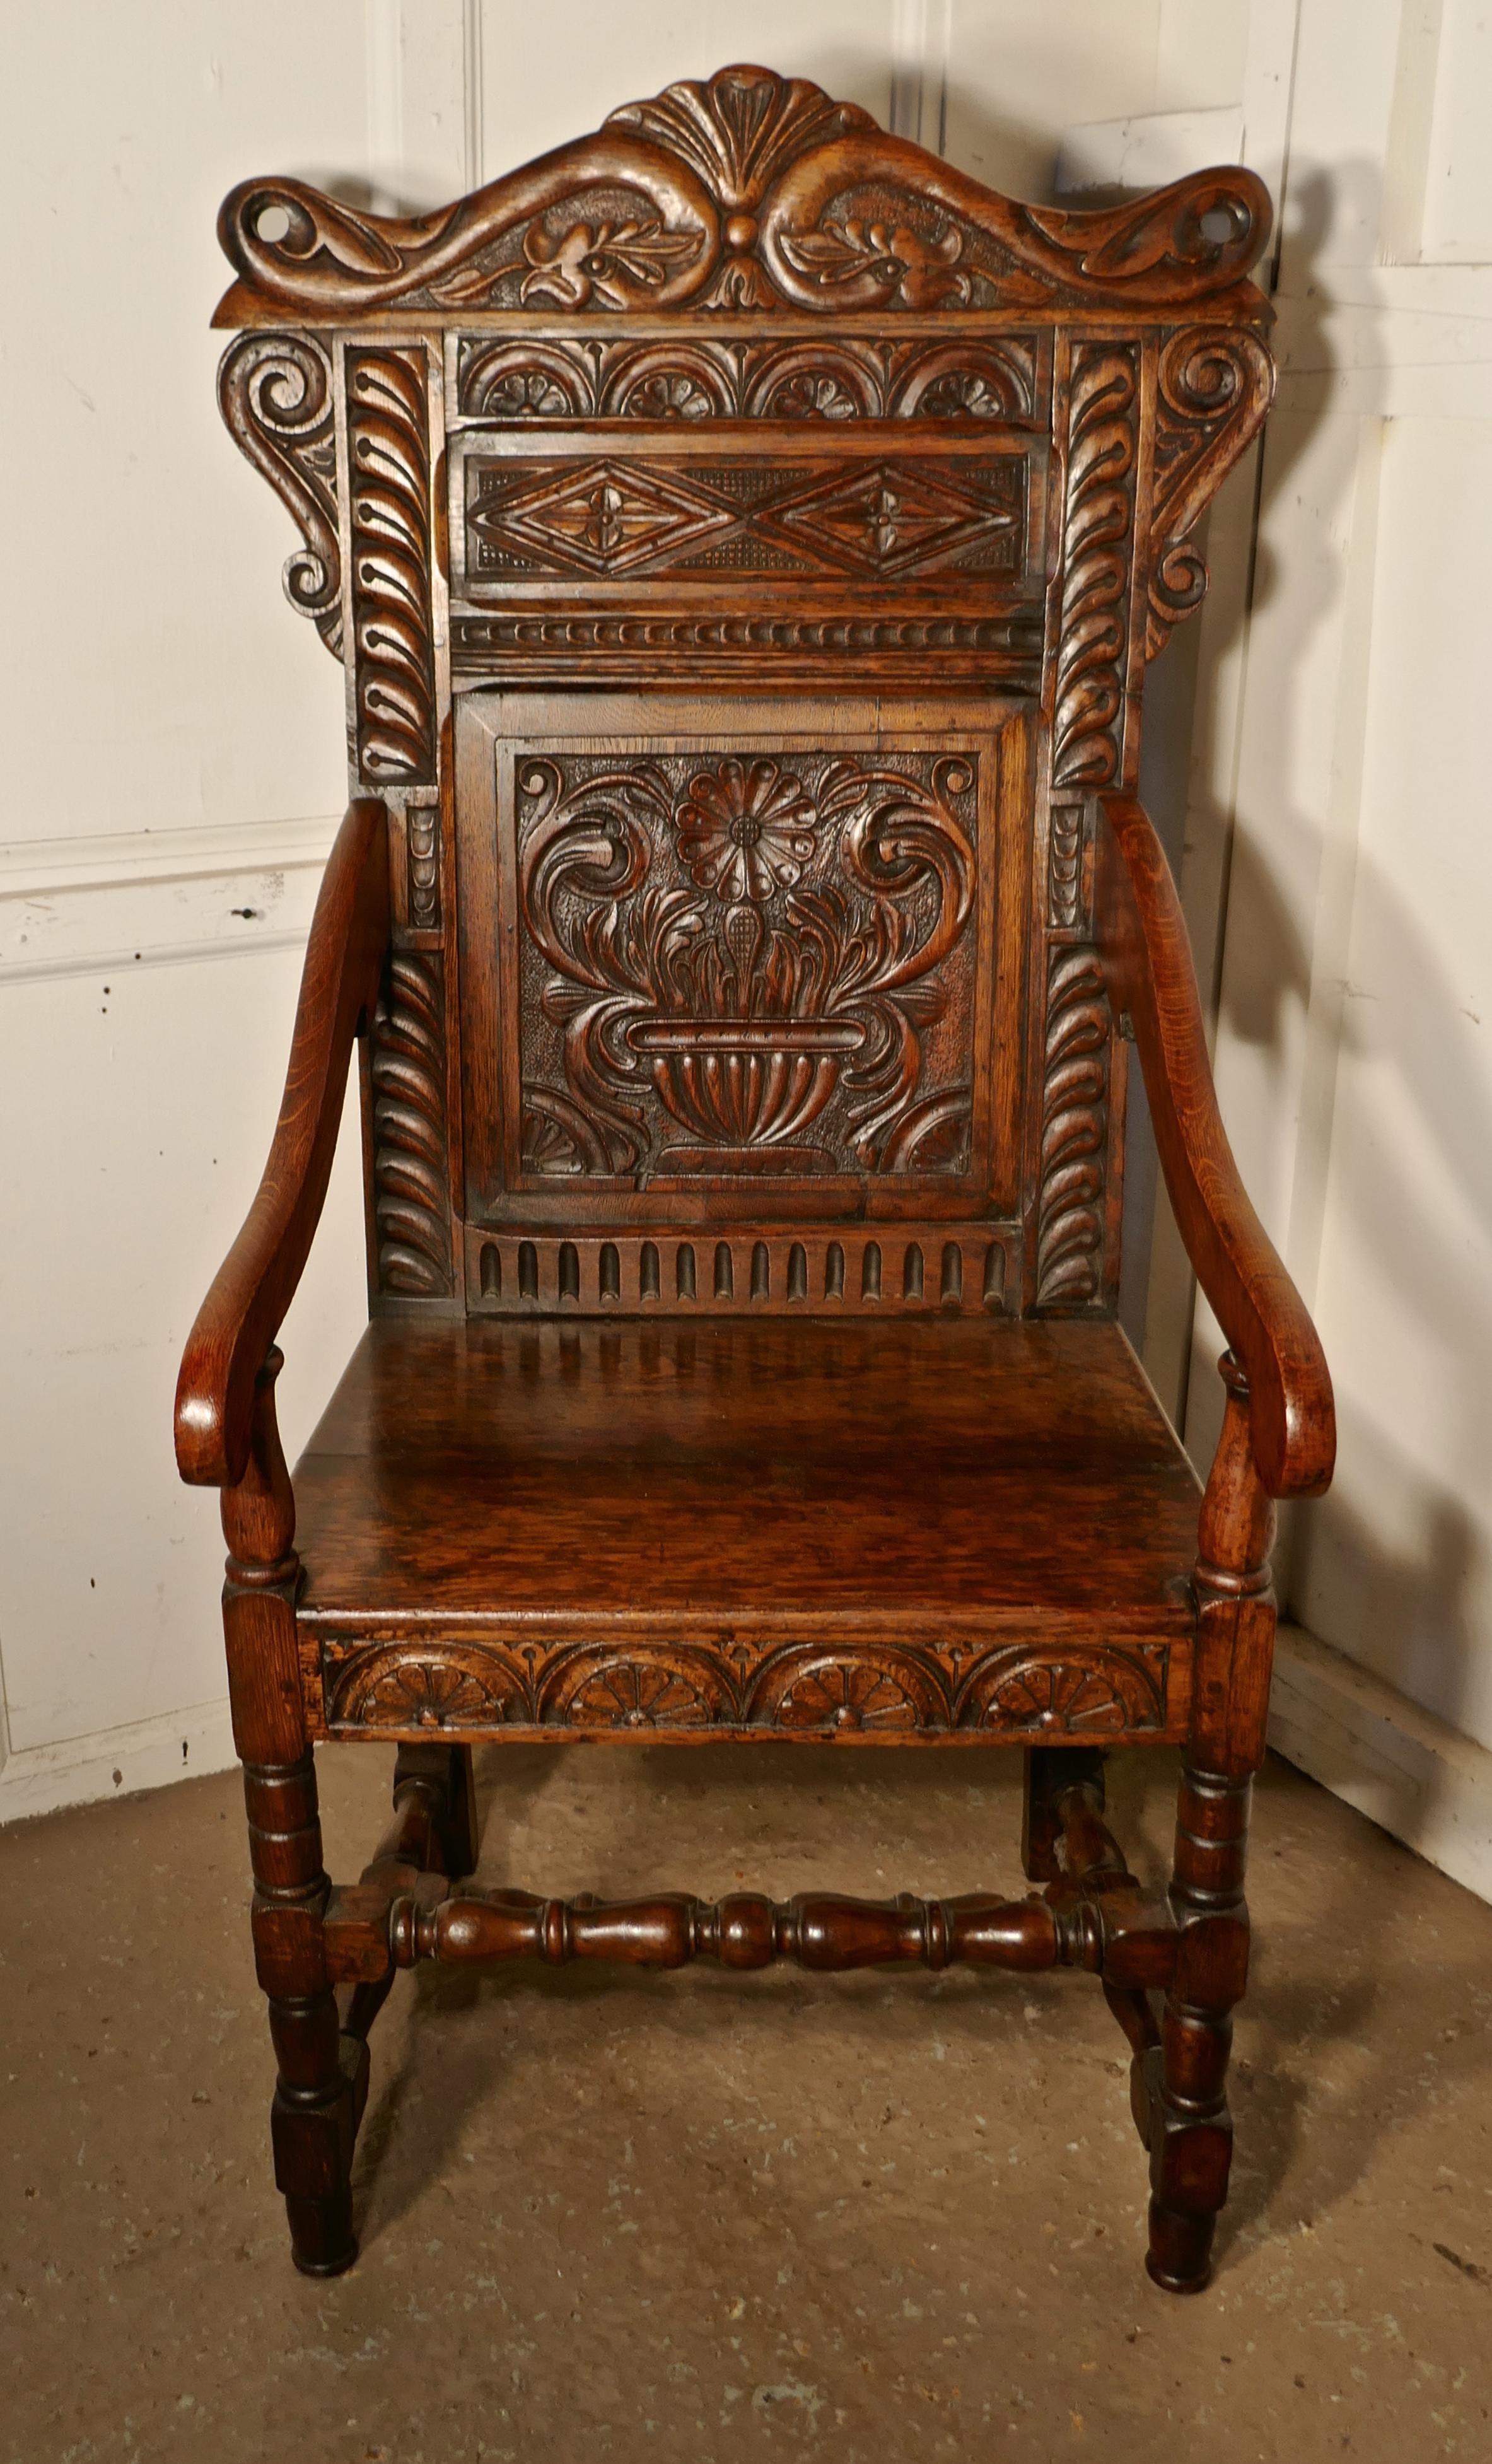 17th century carved oak wainscot chair

This handsome chair, has a magnificent patina, the solid plank seat has a carved border at the front, the turned legs and uprights support the arm rests, all set off with a decorative high throne back carved